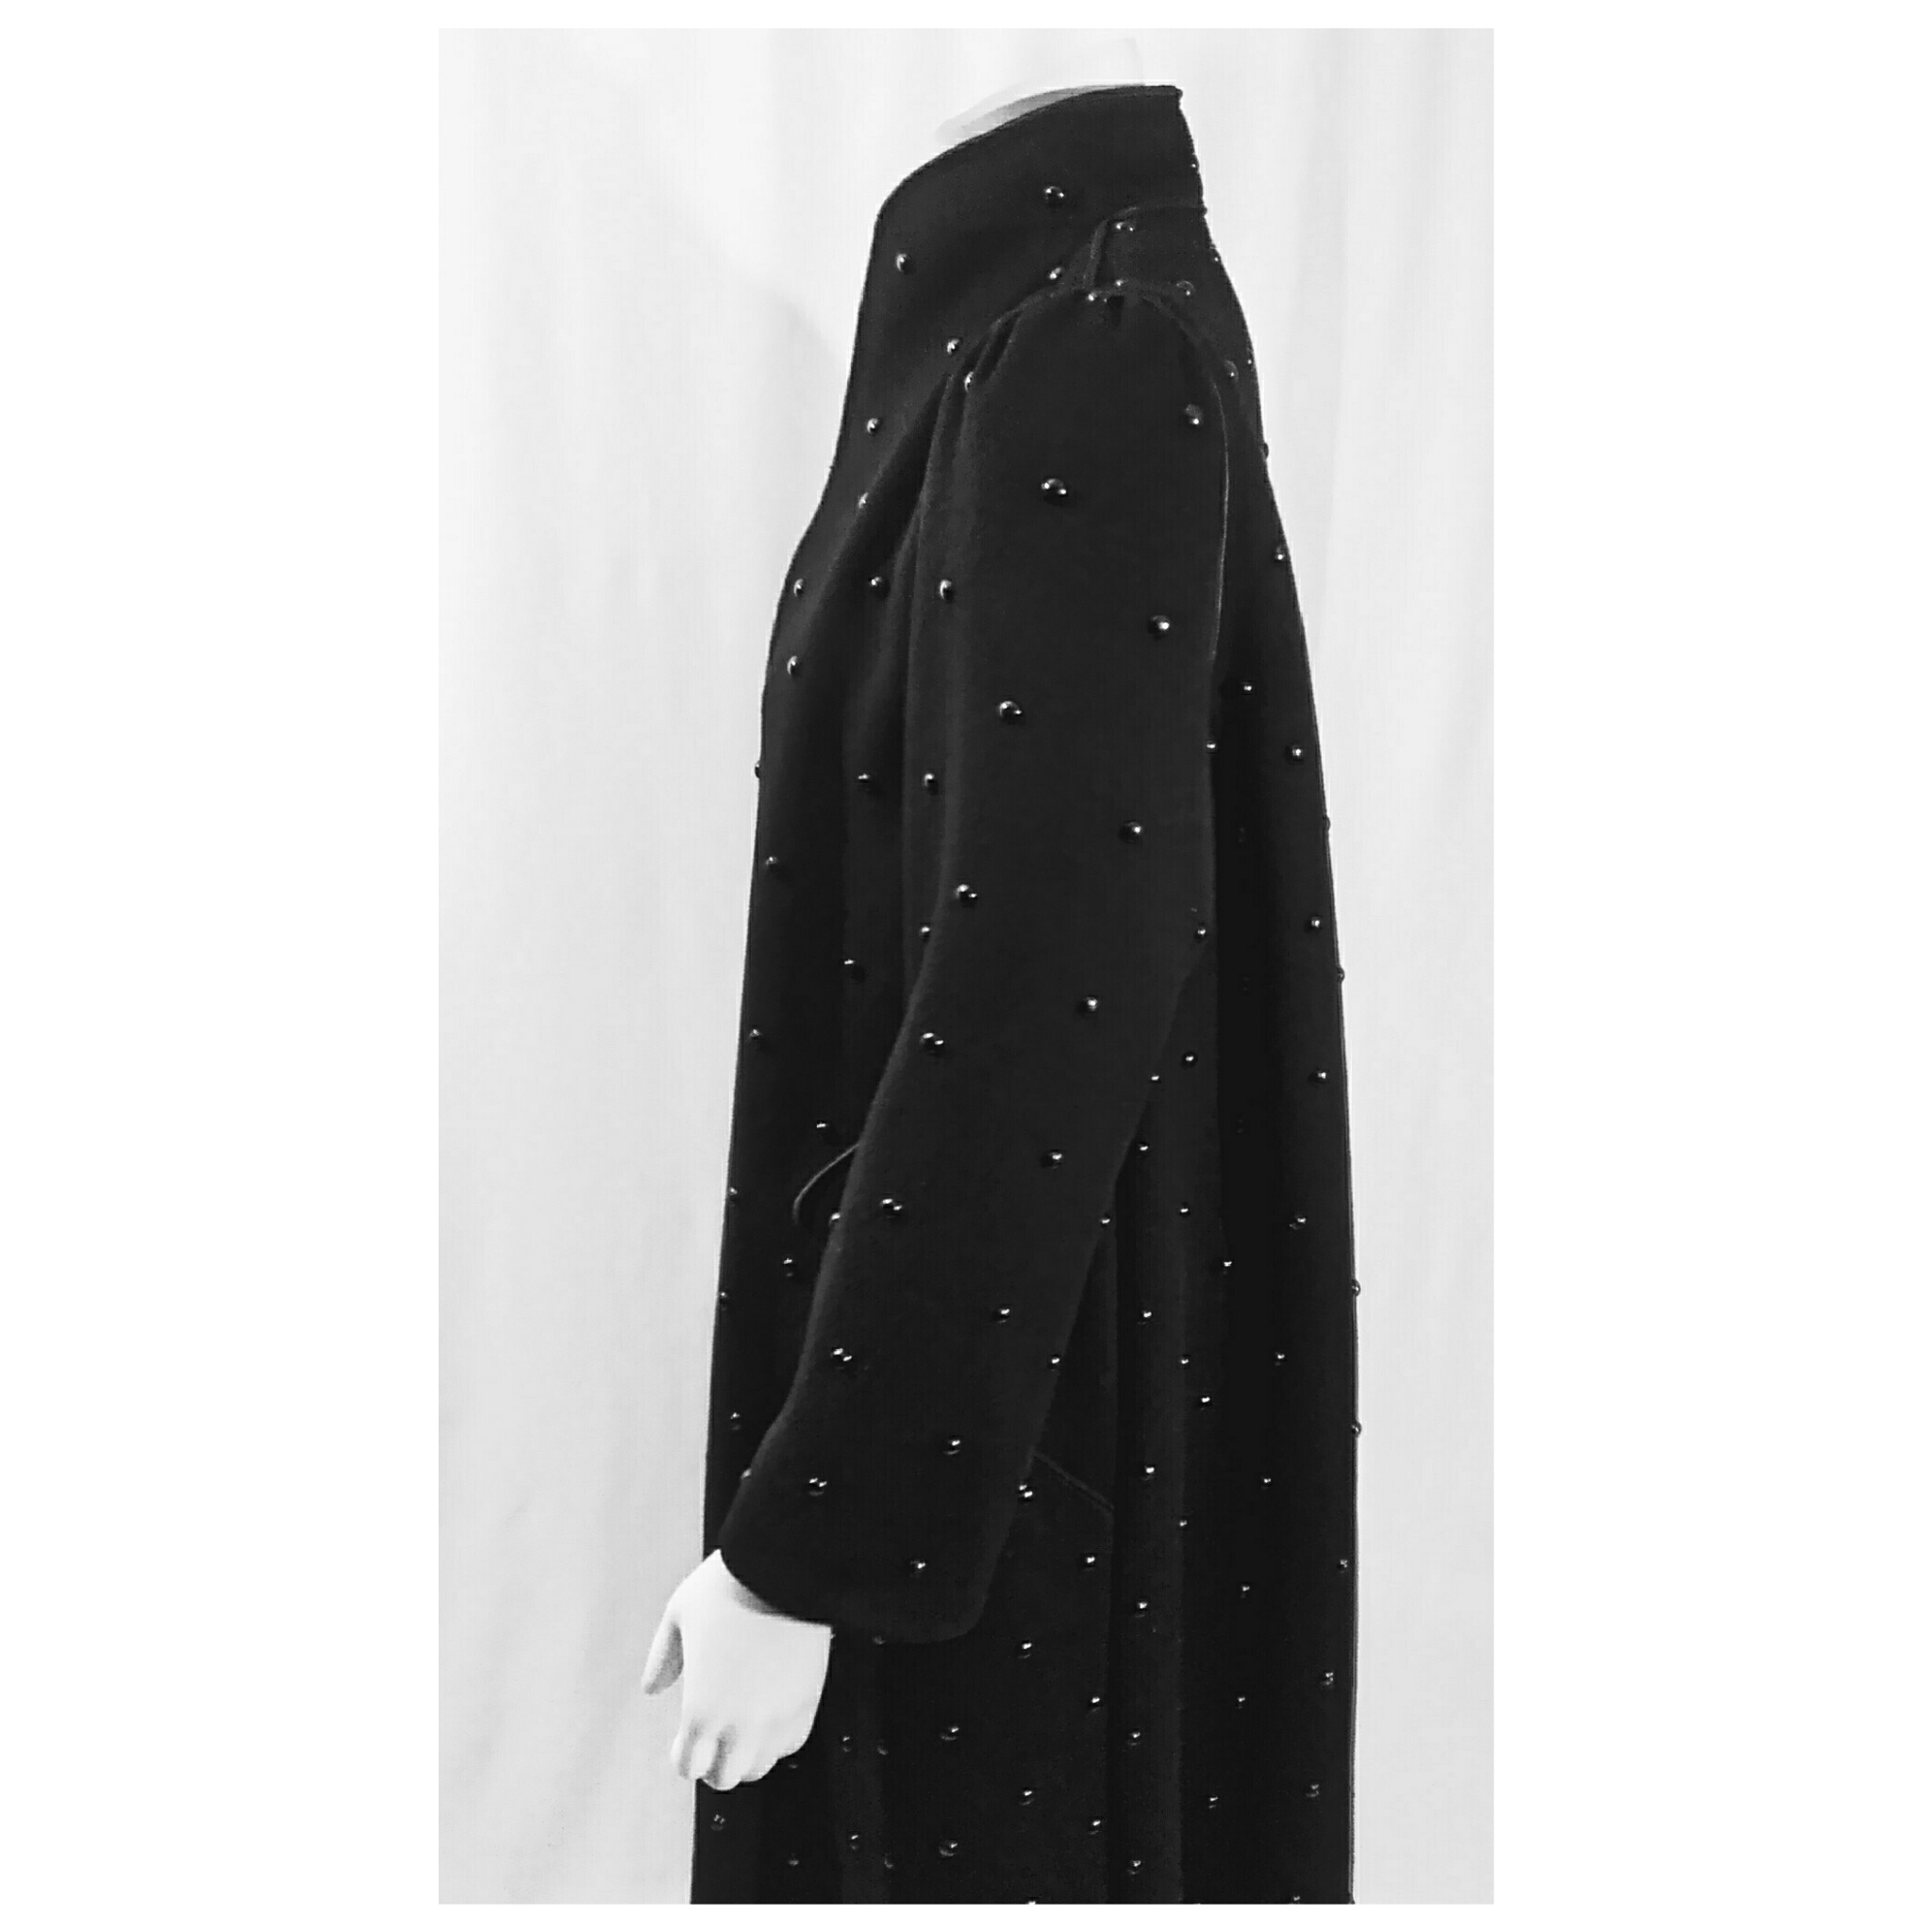 Vintage 1970's Rare Mrs. H. Winter Beaded Embellished Black Wool Coat with Matching Suede Scarf; Black Wool Embellished Coat; Harriet Winter